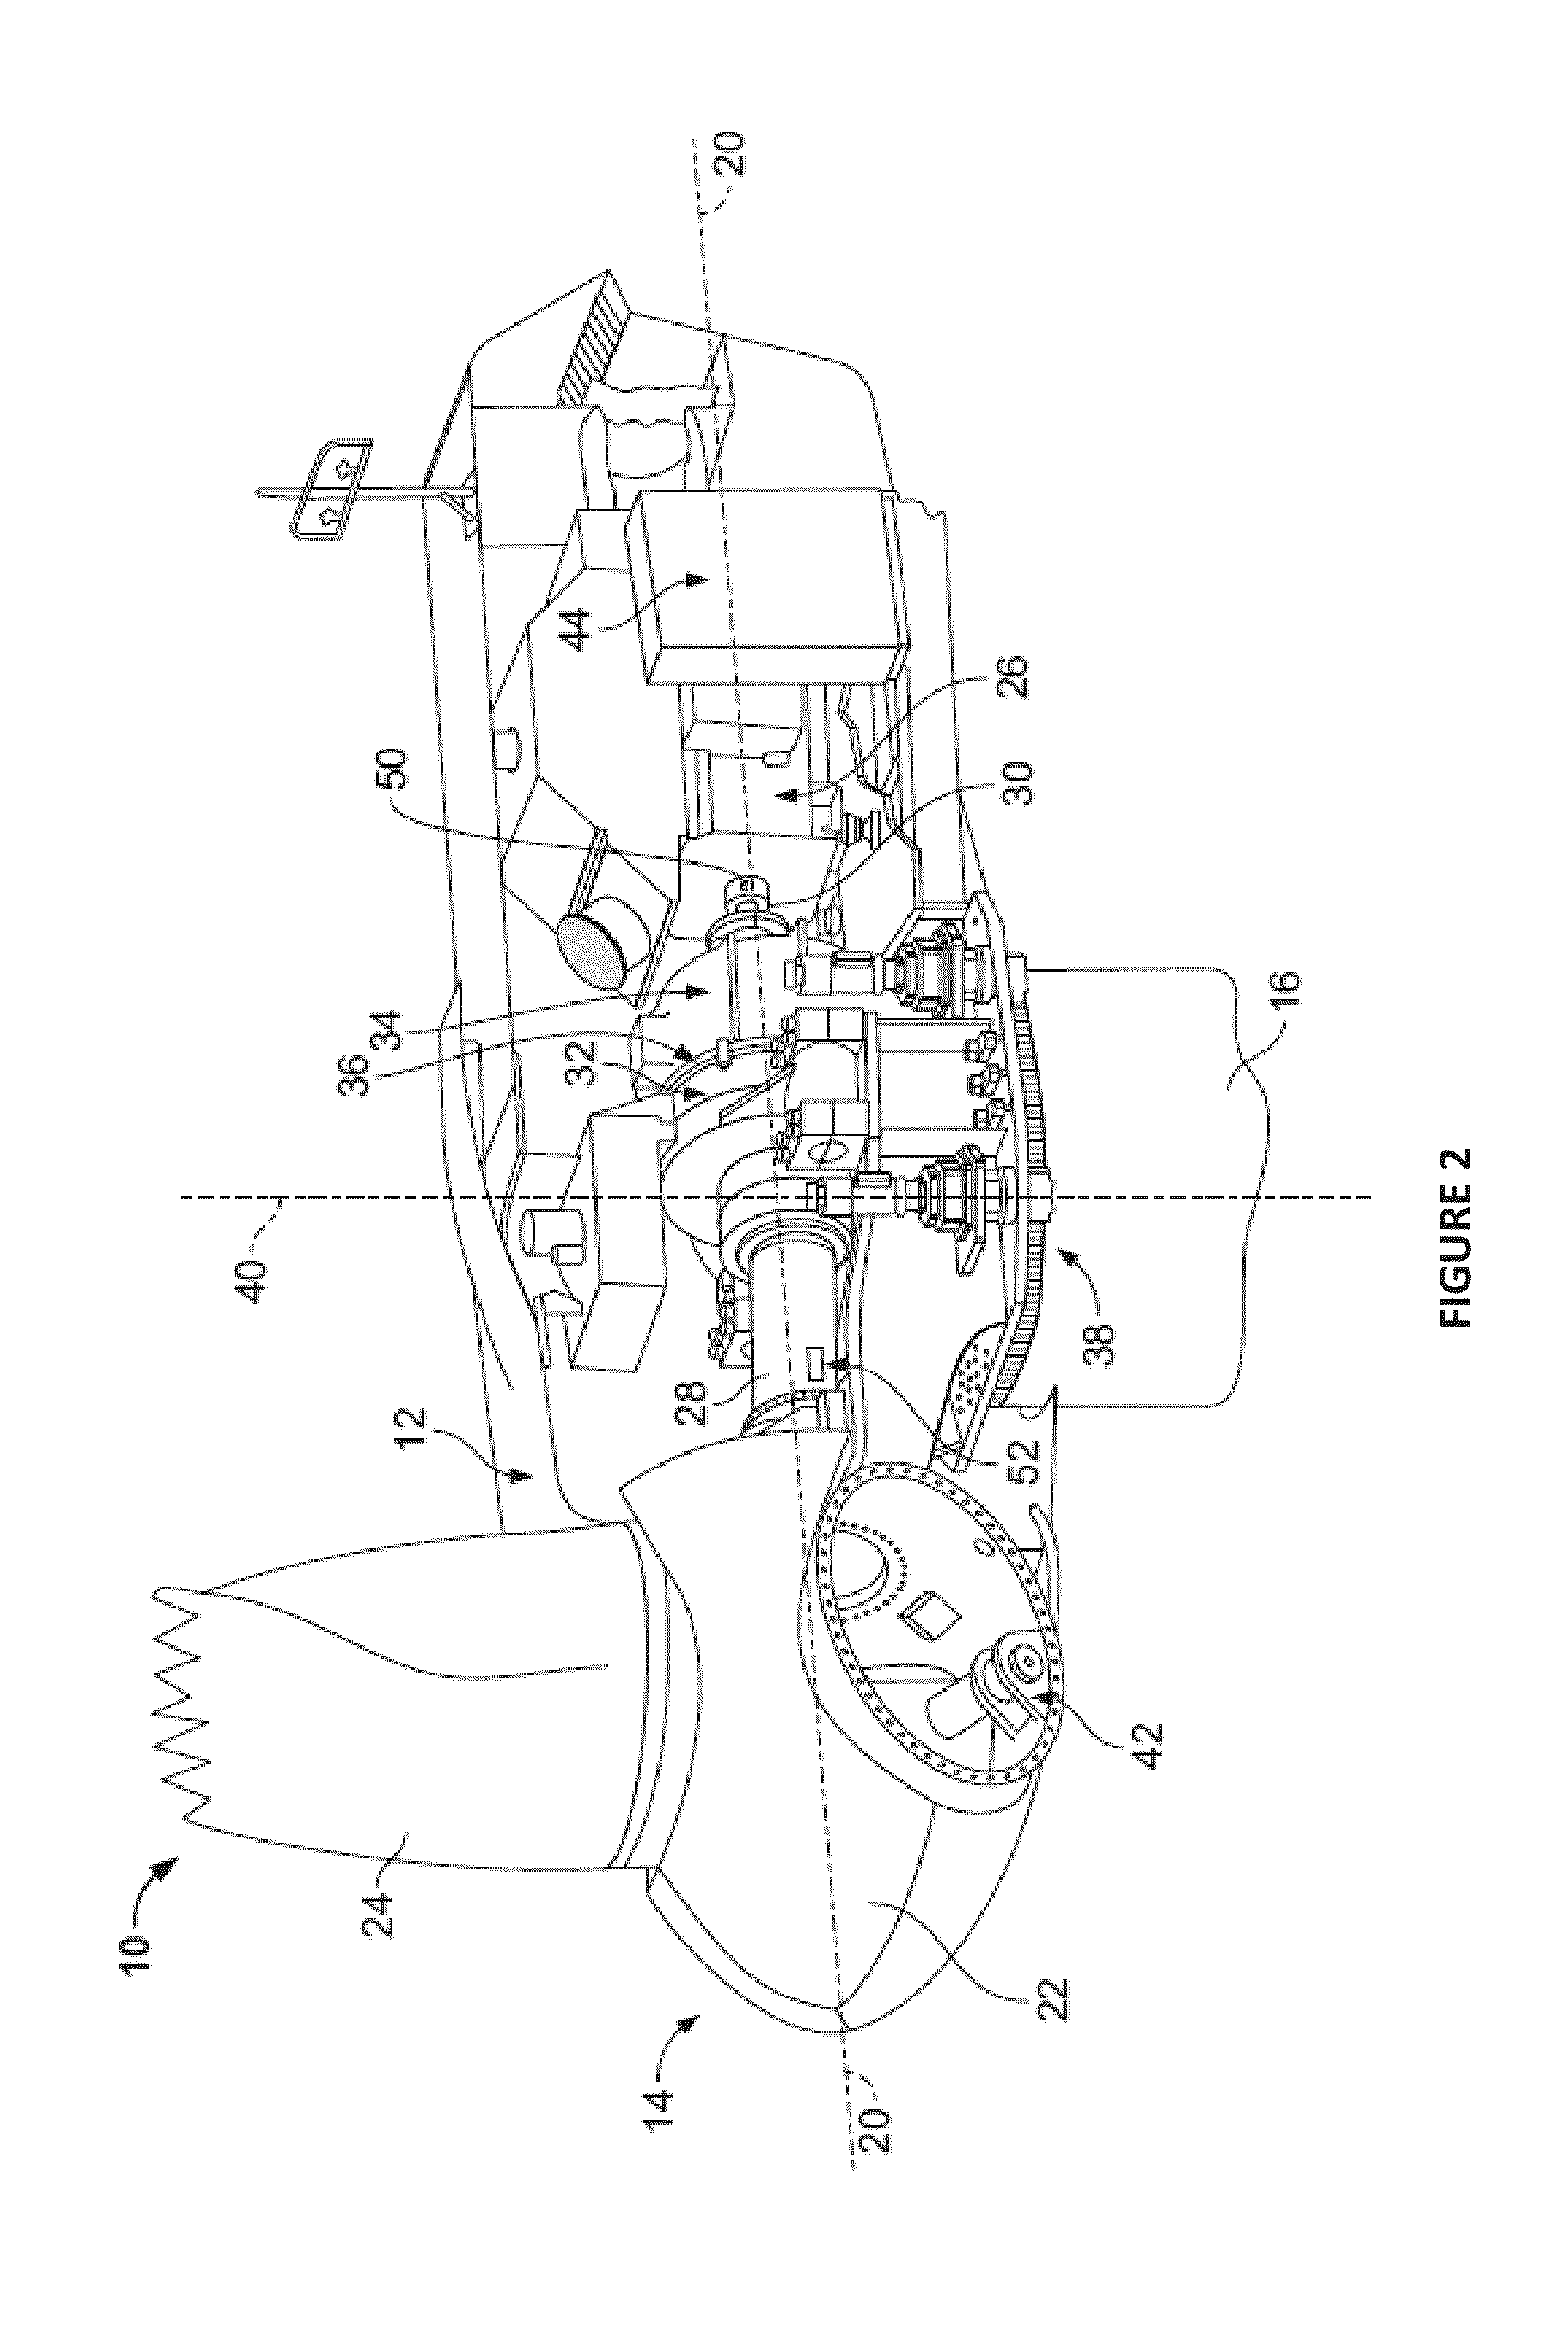 Method and systems for operating a wind turbine when recovering from a grid contingency event